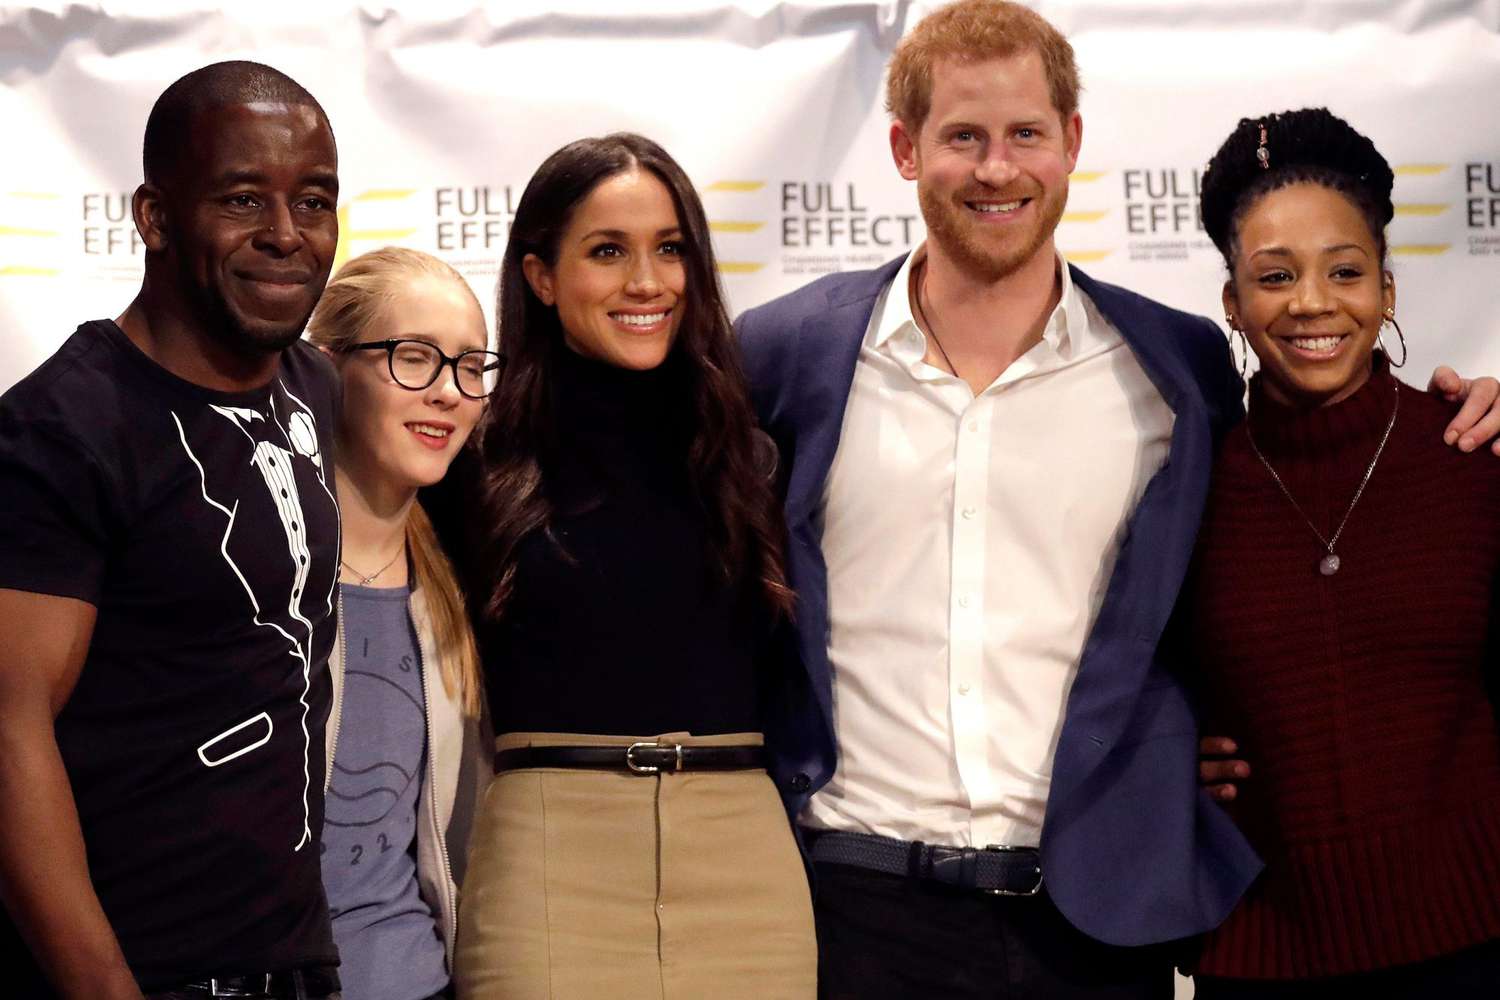 Meghan Markle and Prince Harry pose with hip-hop crew Full Effect at Nottingham Academy